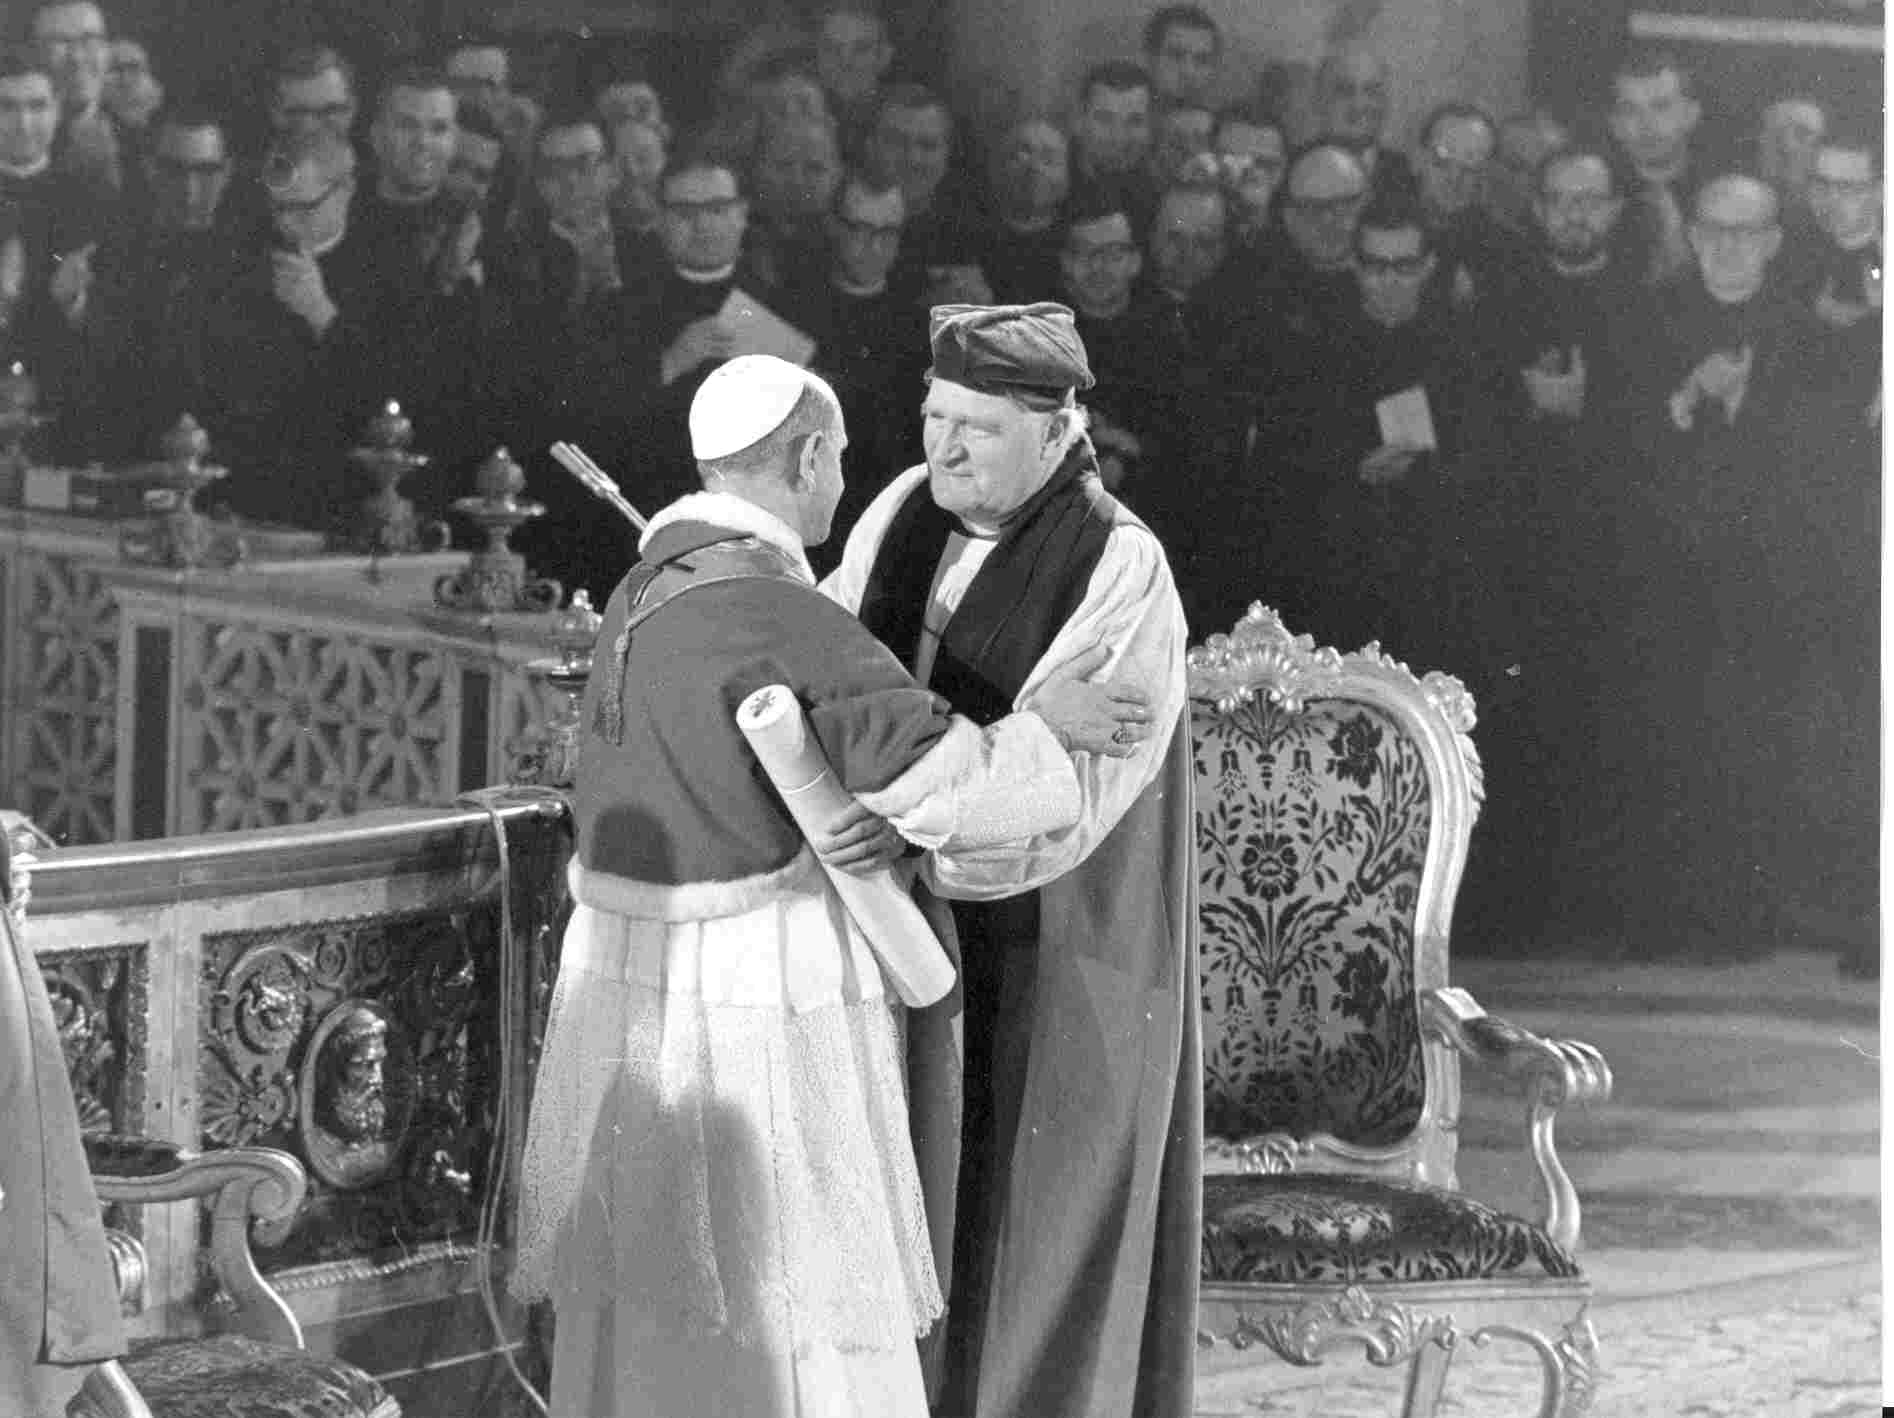 Archbishop Michael Ramsey and Pope Paul VI embrace after signing Common Declaration (visible in the Archbishop's left hand)